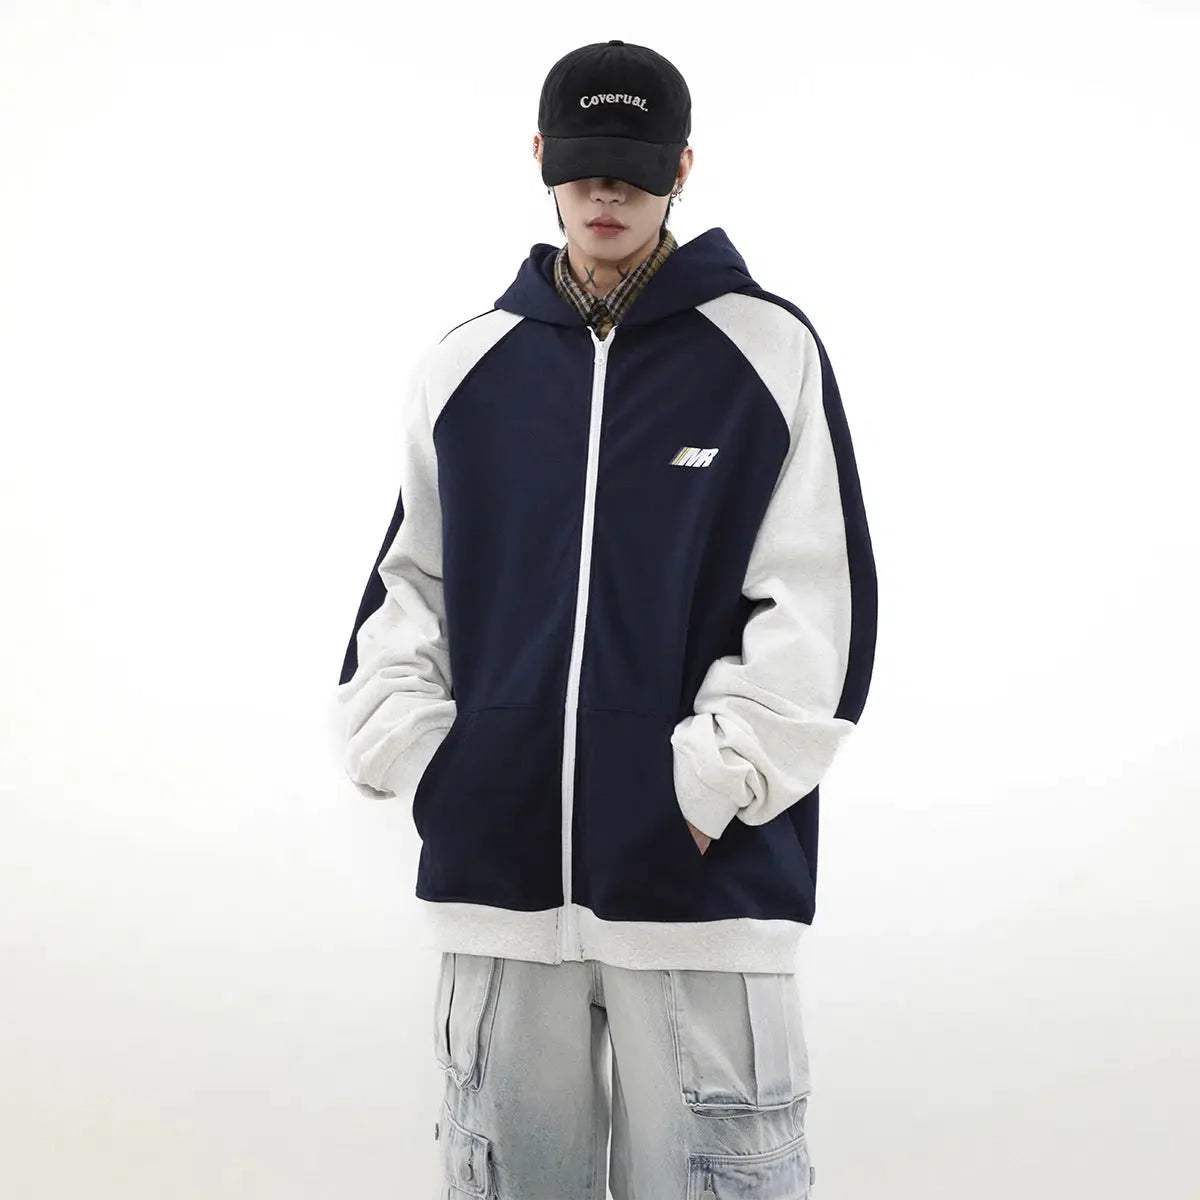 Contrast Comfty Fit Casual Hoodie Korean Street Fashion Hoodie By Mr Nearly Shop Online at OH Vault